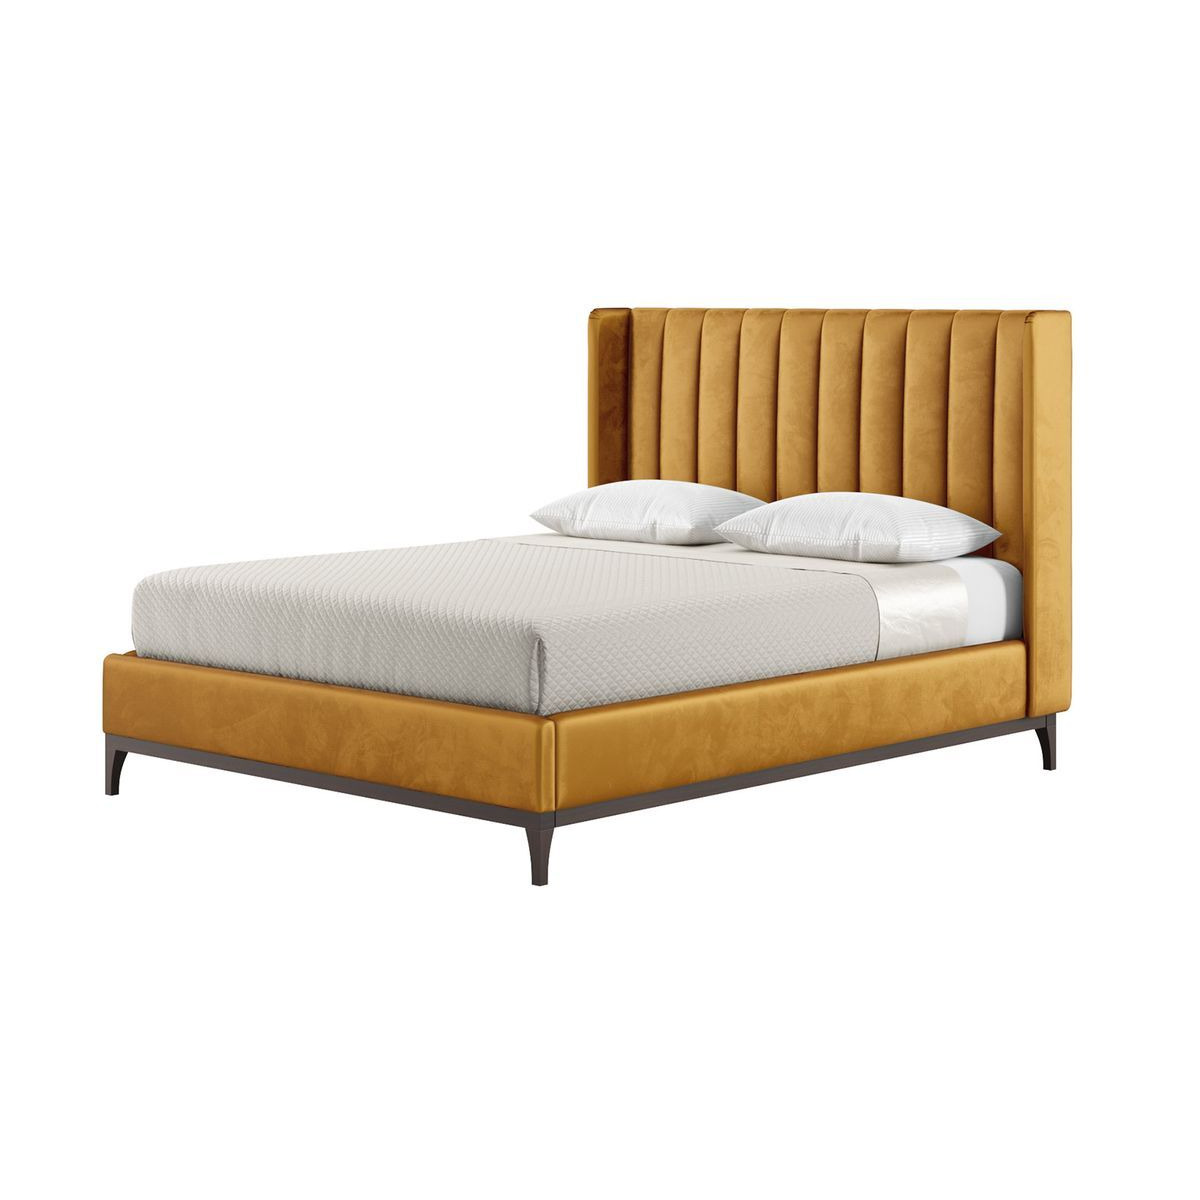 Reese 5ft King Size Bed Frame with fluted vertical stitch wing headboard, mustard, Leg colour: dark oak - image 1